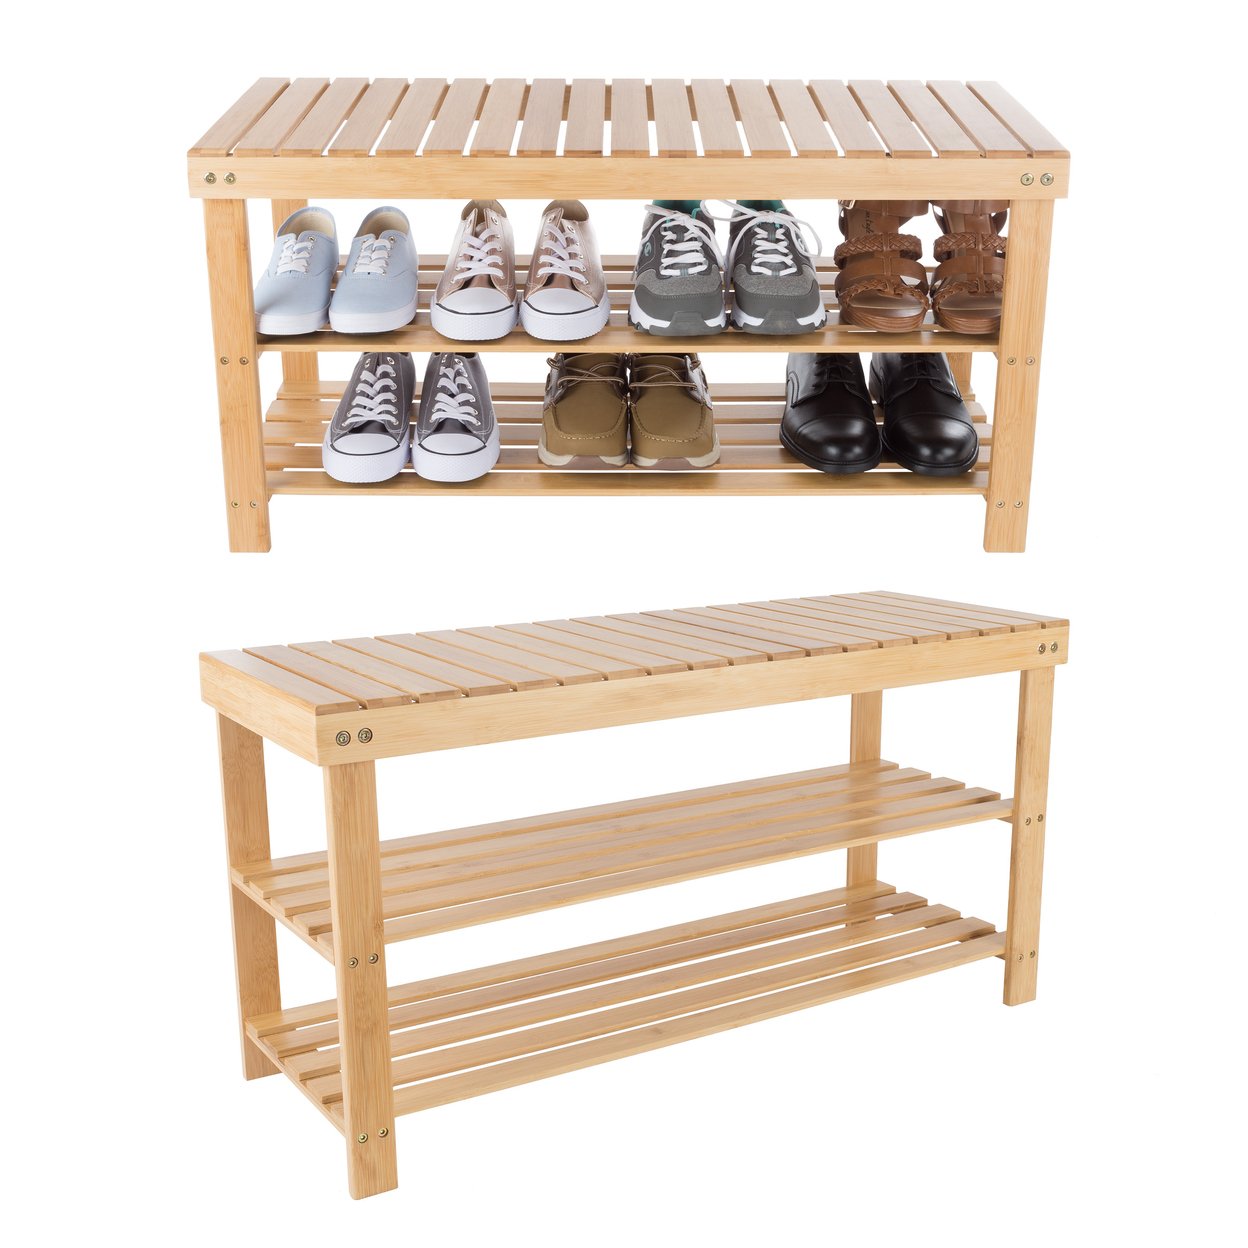 Wooden Bamboo Shoe Rack Seat Bench 3 Tiers 35 X 18 Inch Natural Wood 2 Shelves